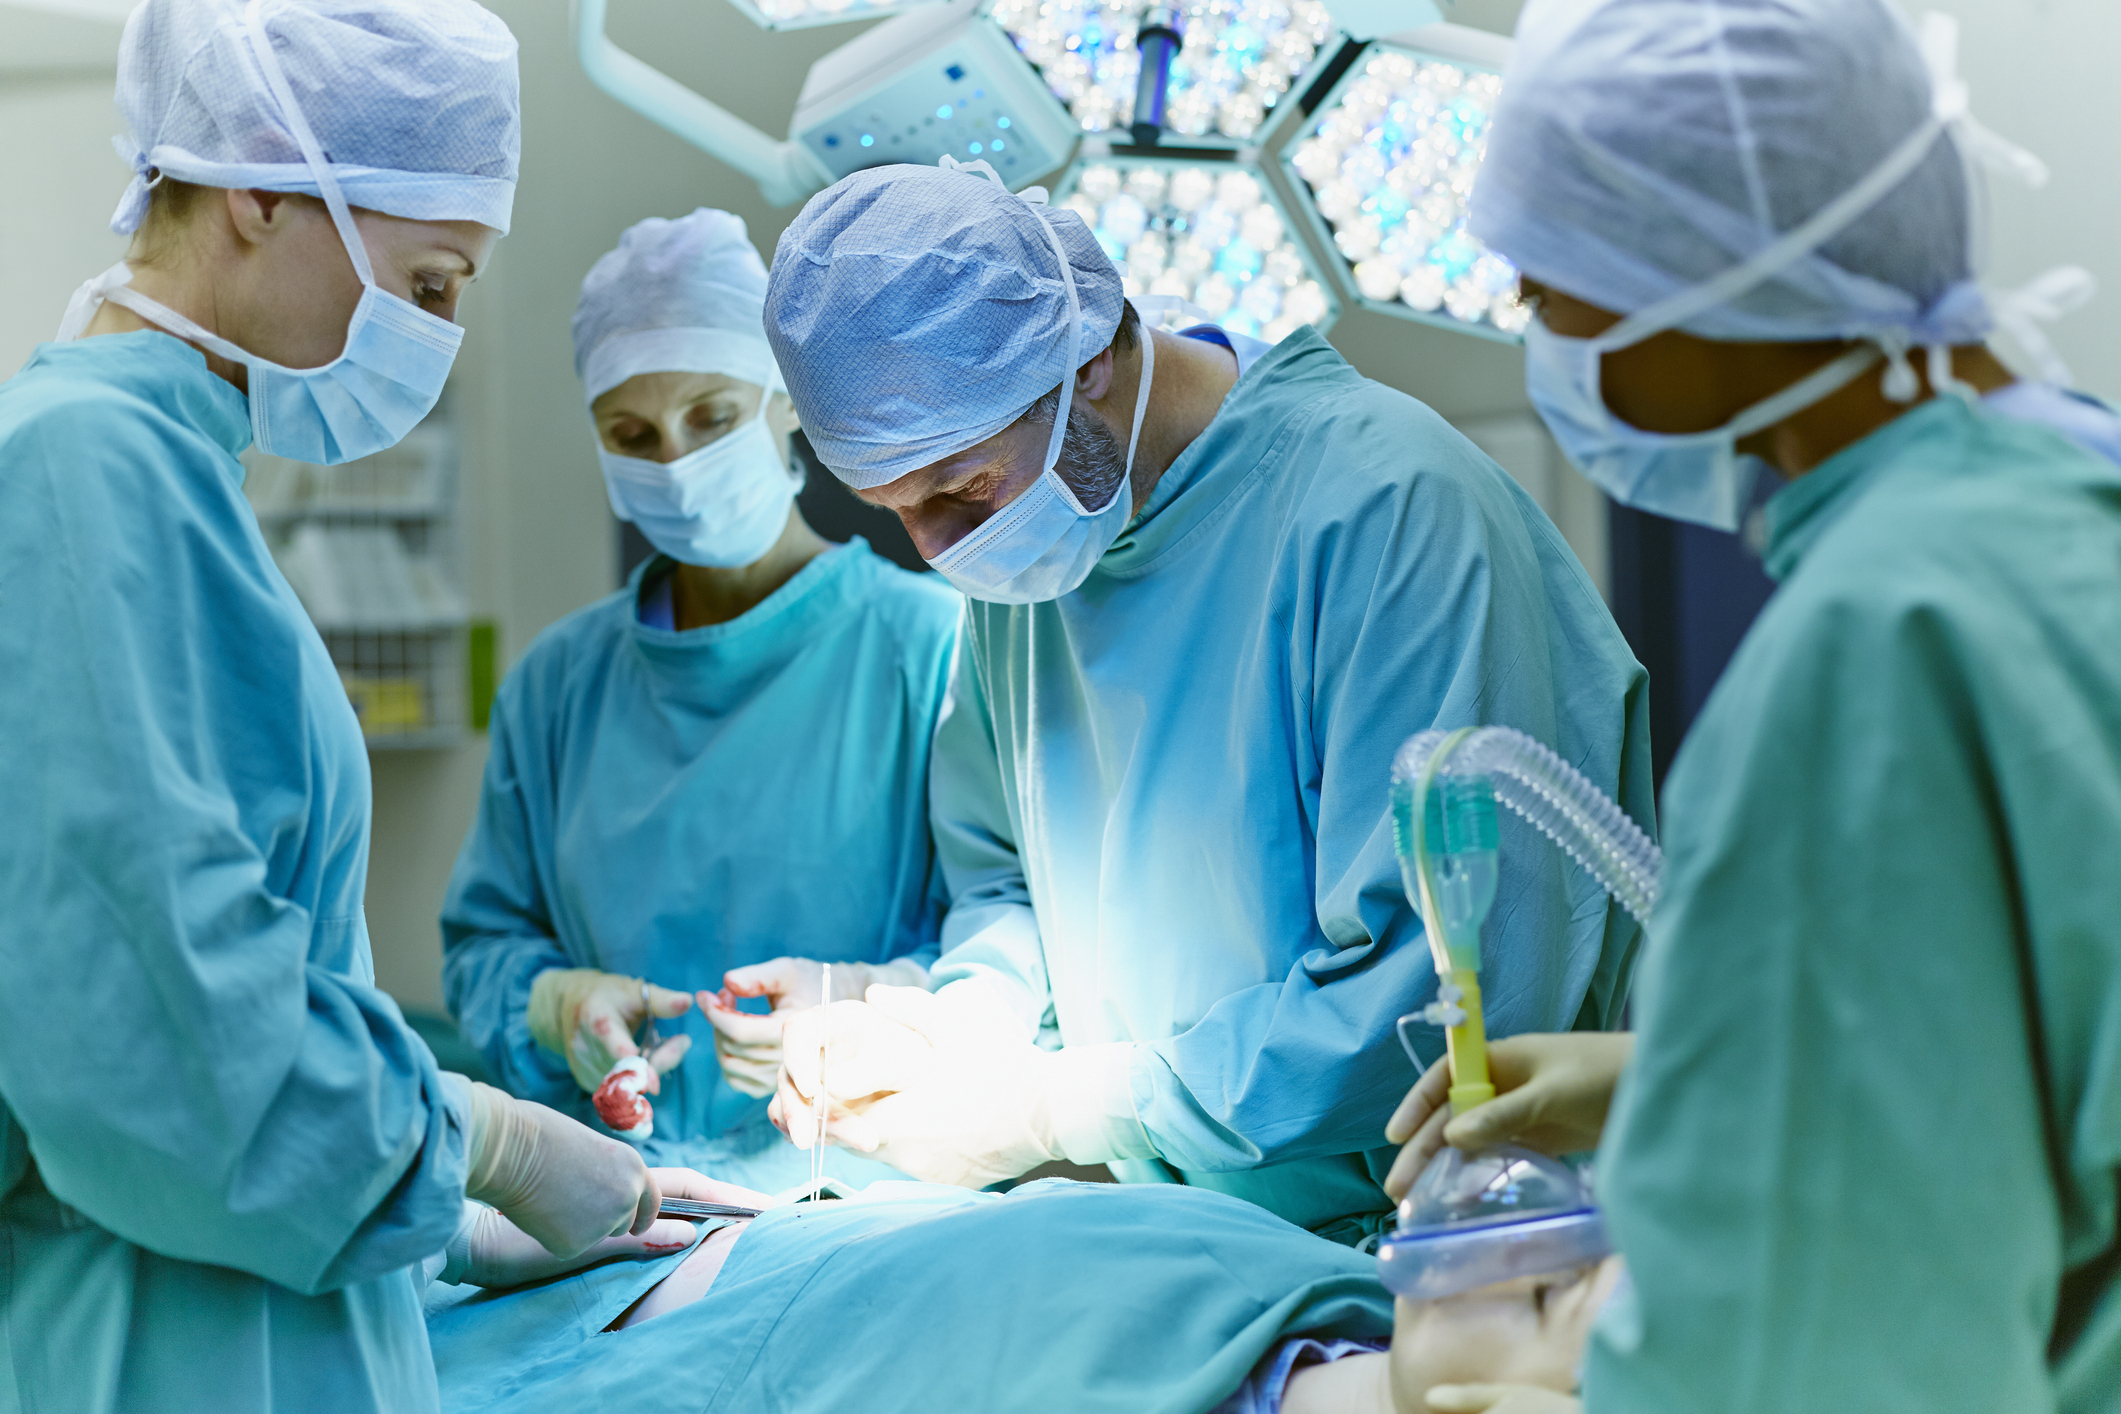 Surgeons performing surgery in operating room - Greenville Health System